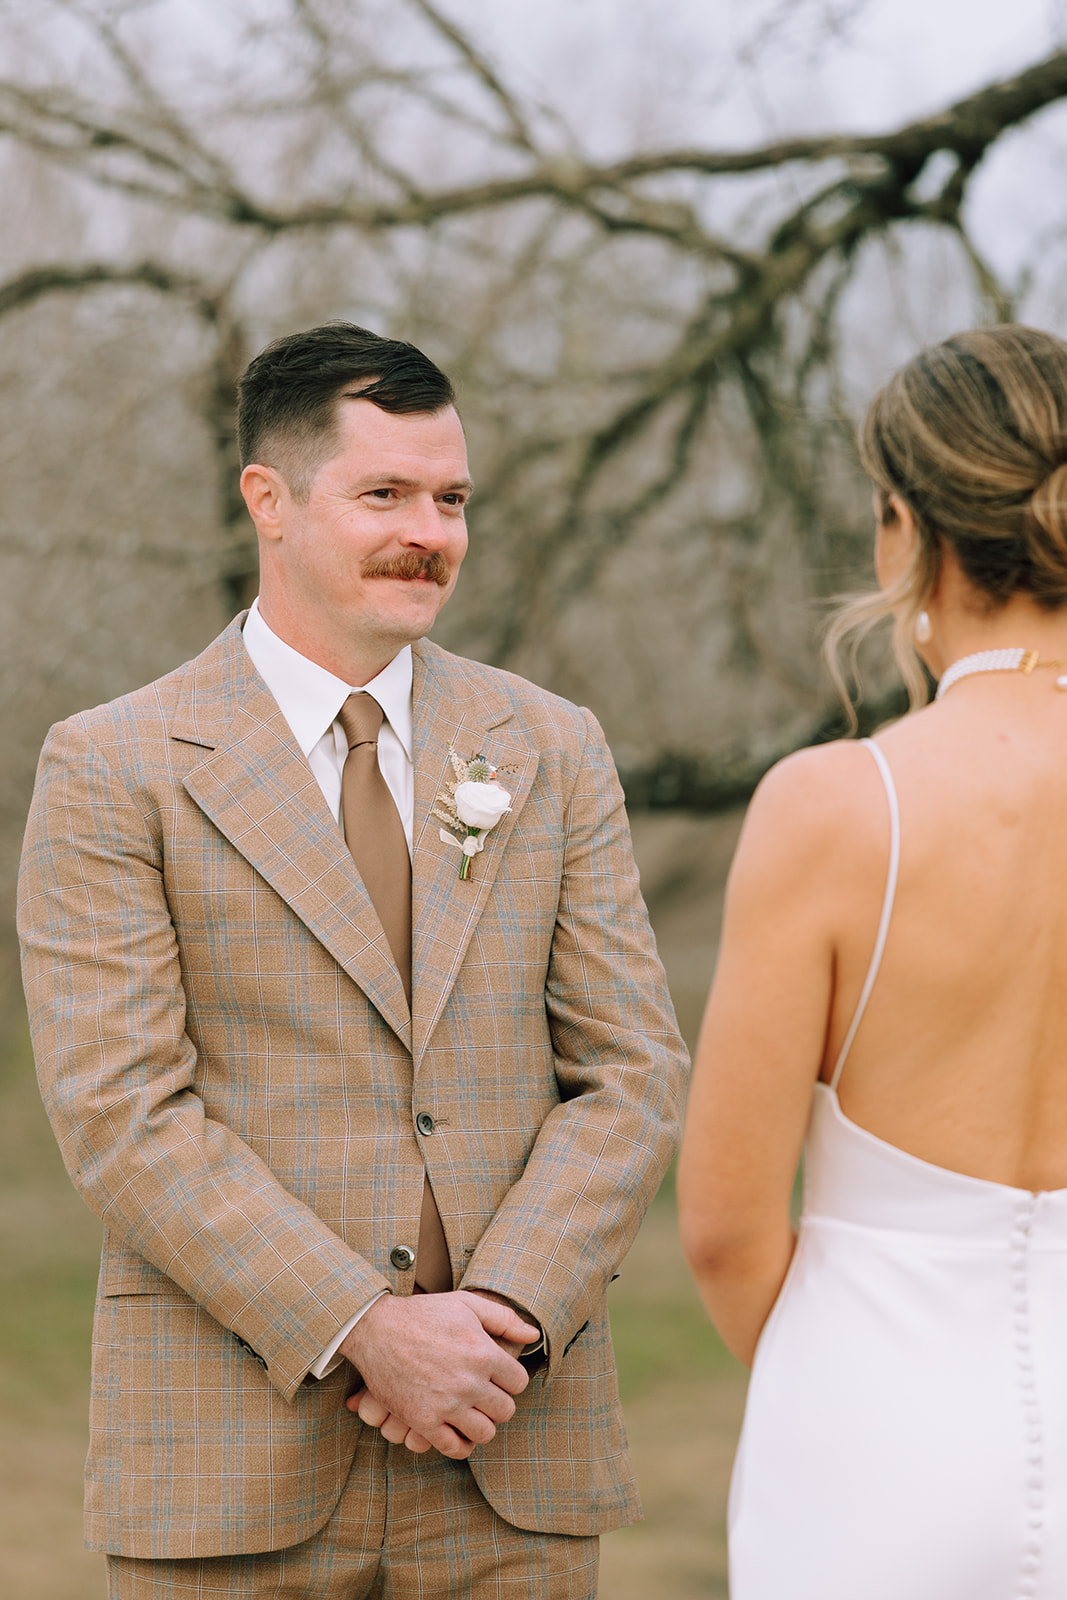 couple exchanges vows at outdoor wedding